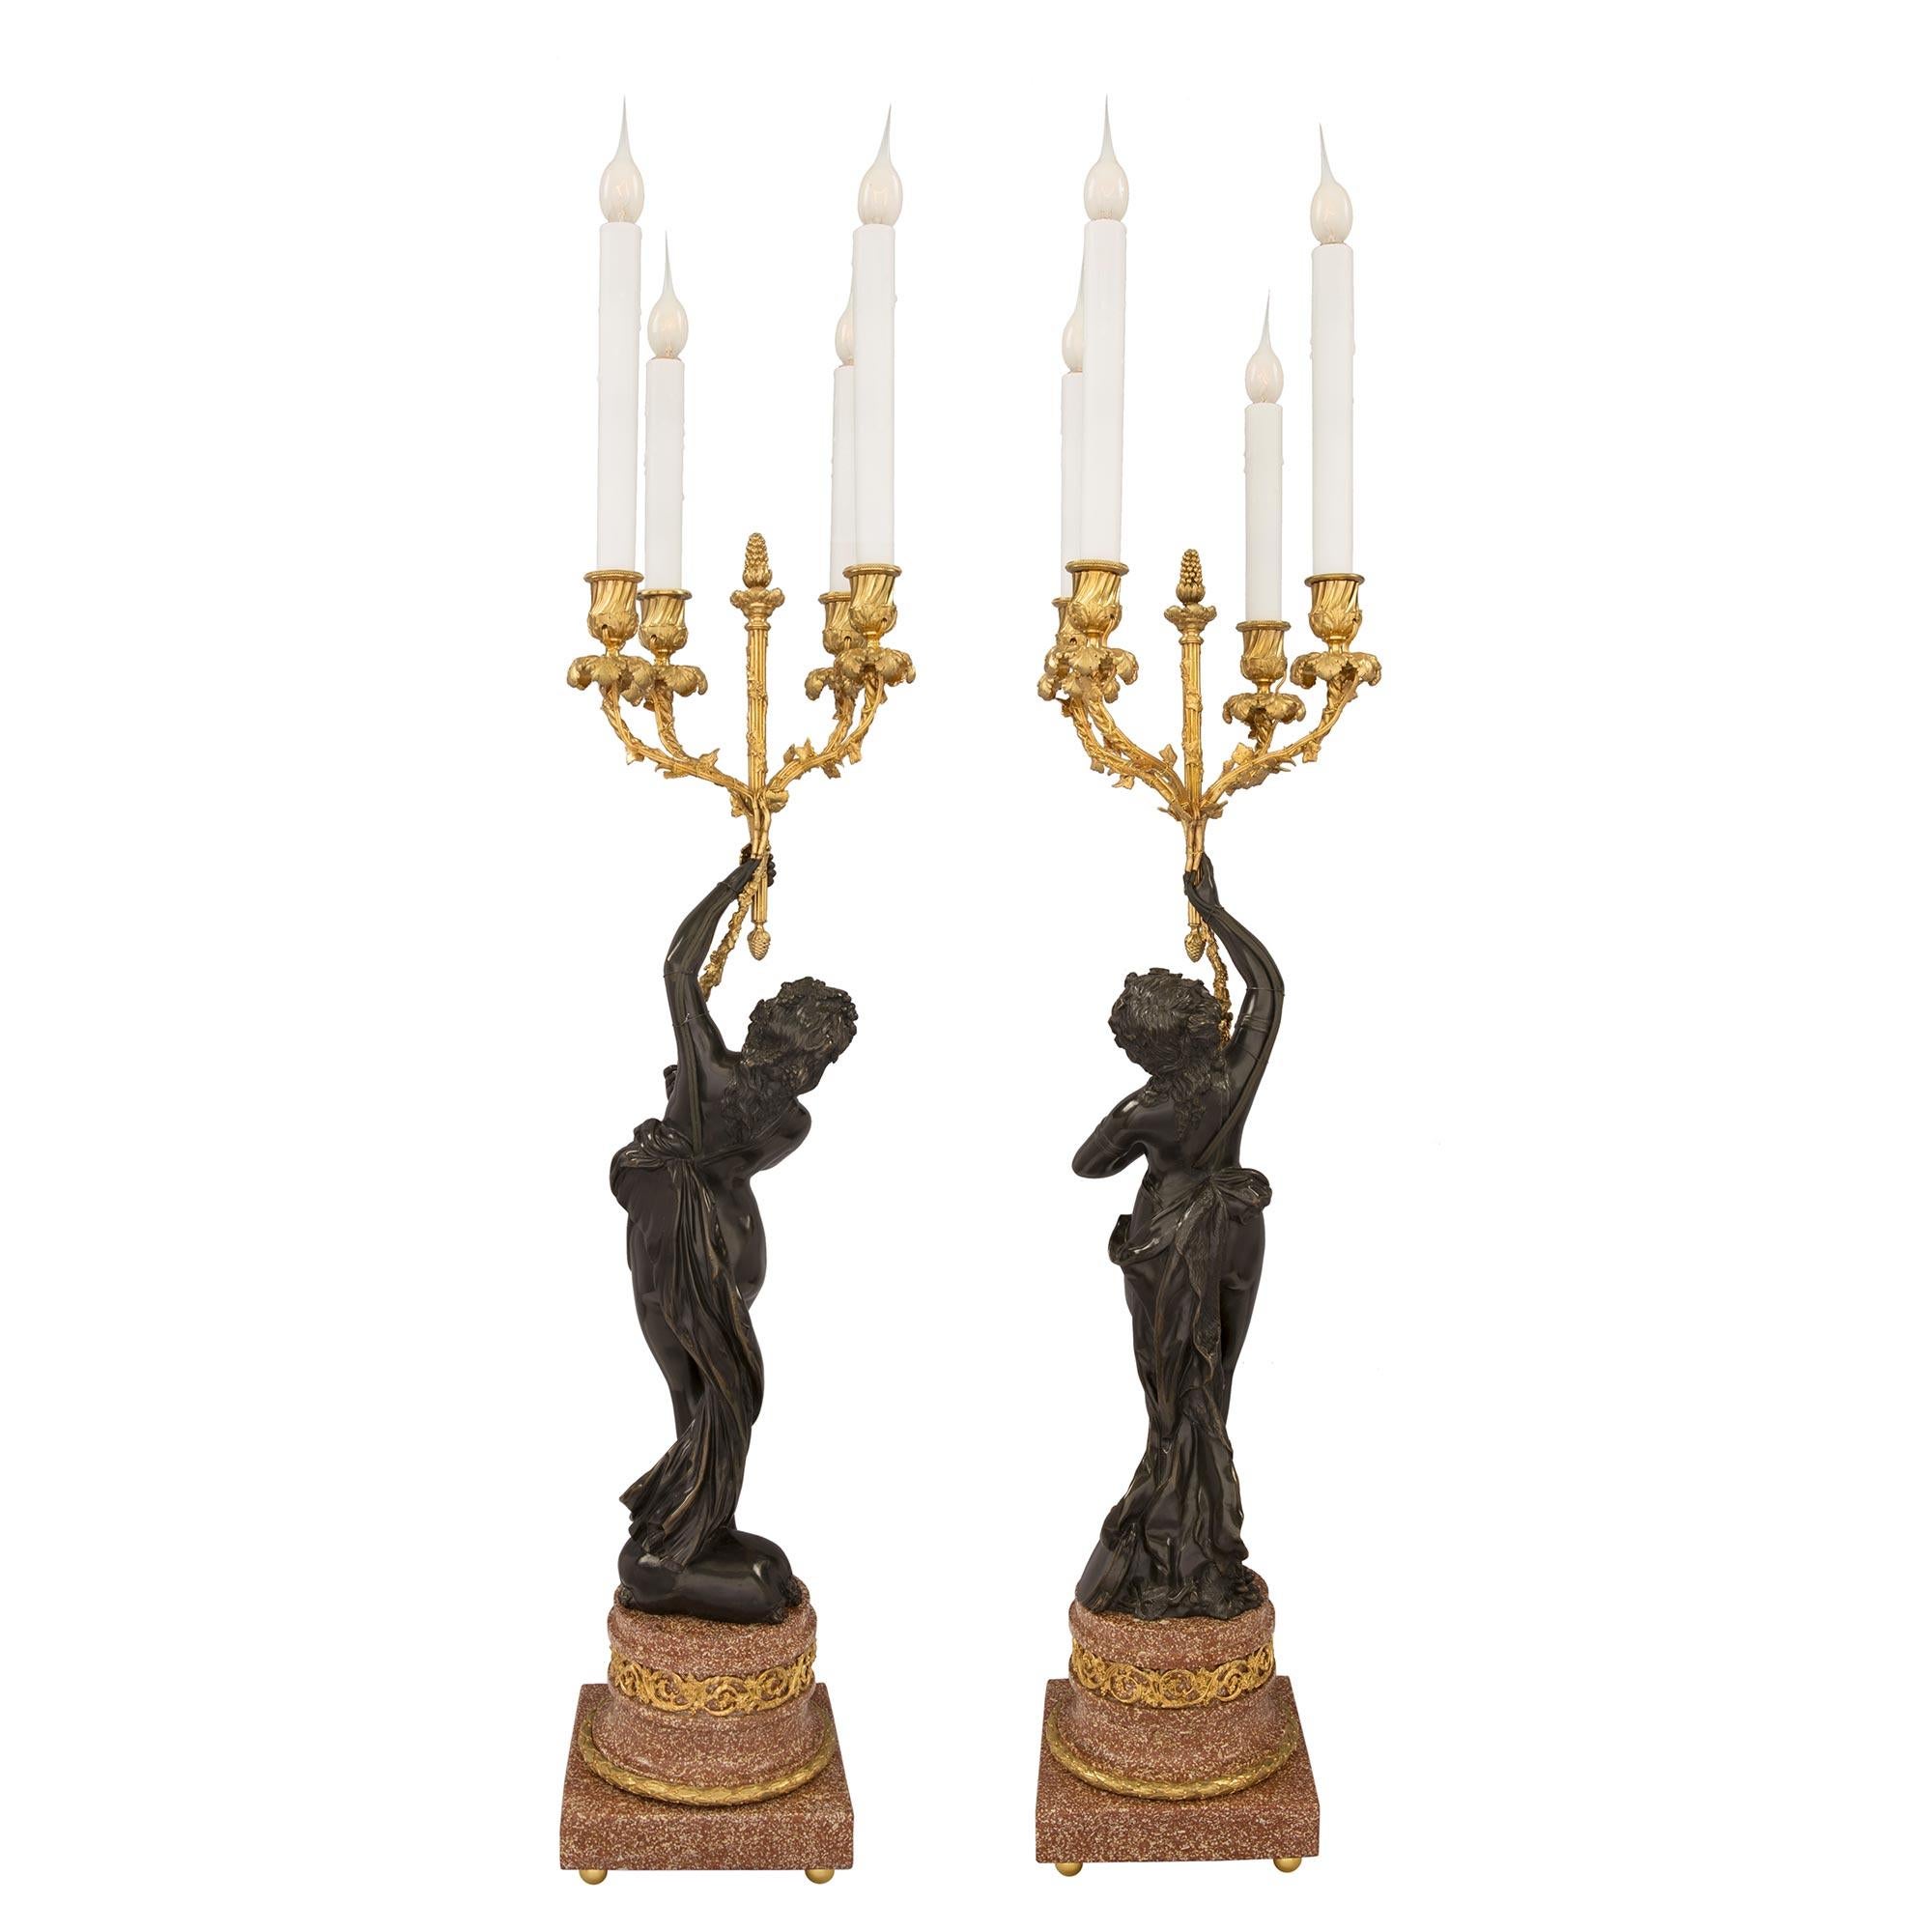 Patinated Pair of French 19th Century Louis XVI Style Candelabras Lamps For Sale